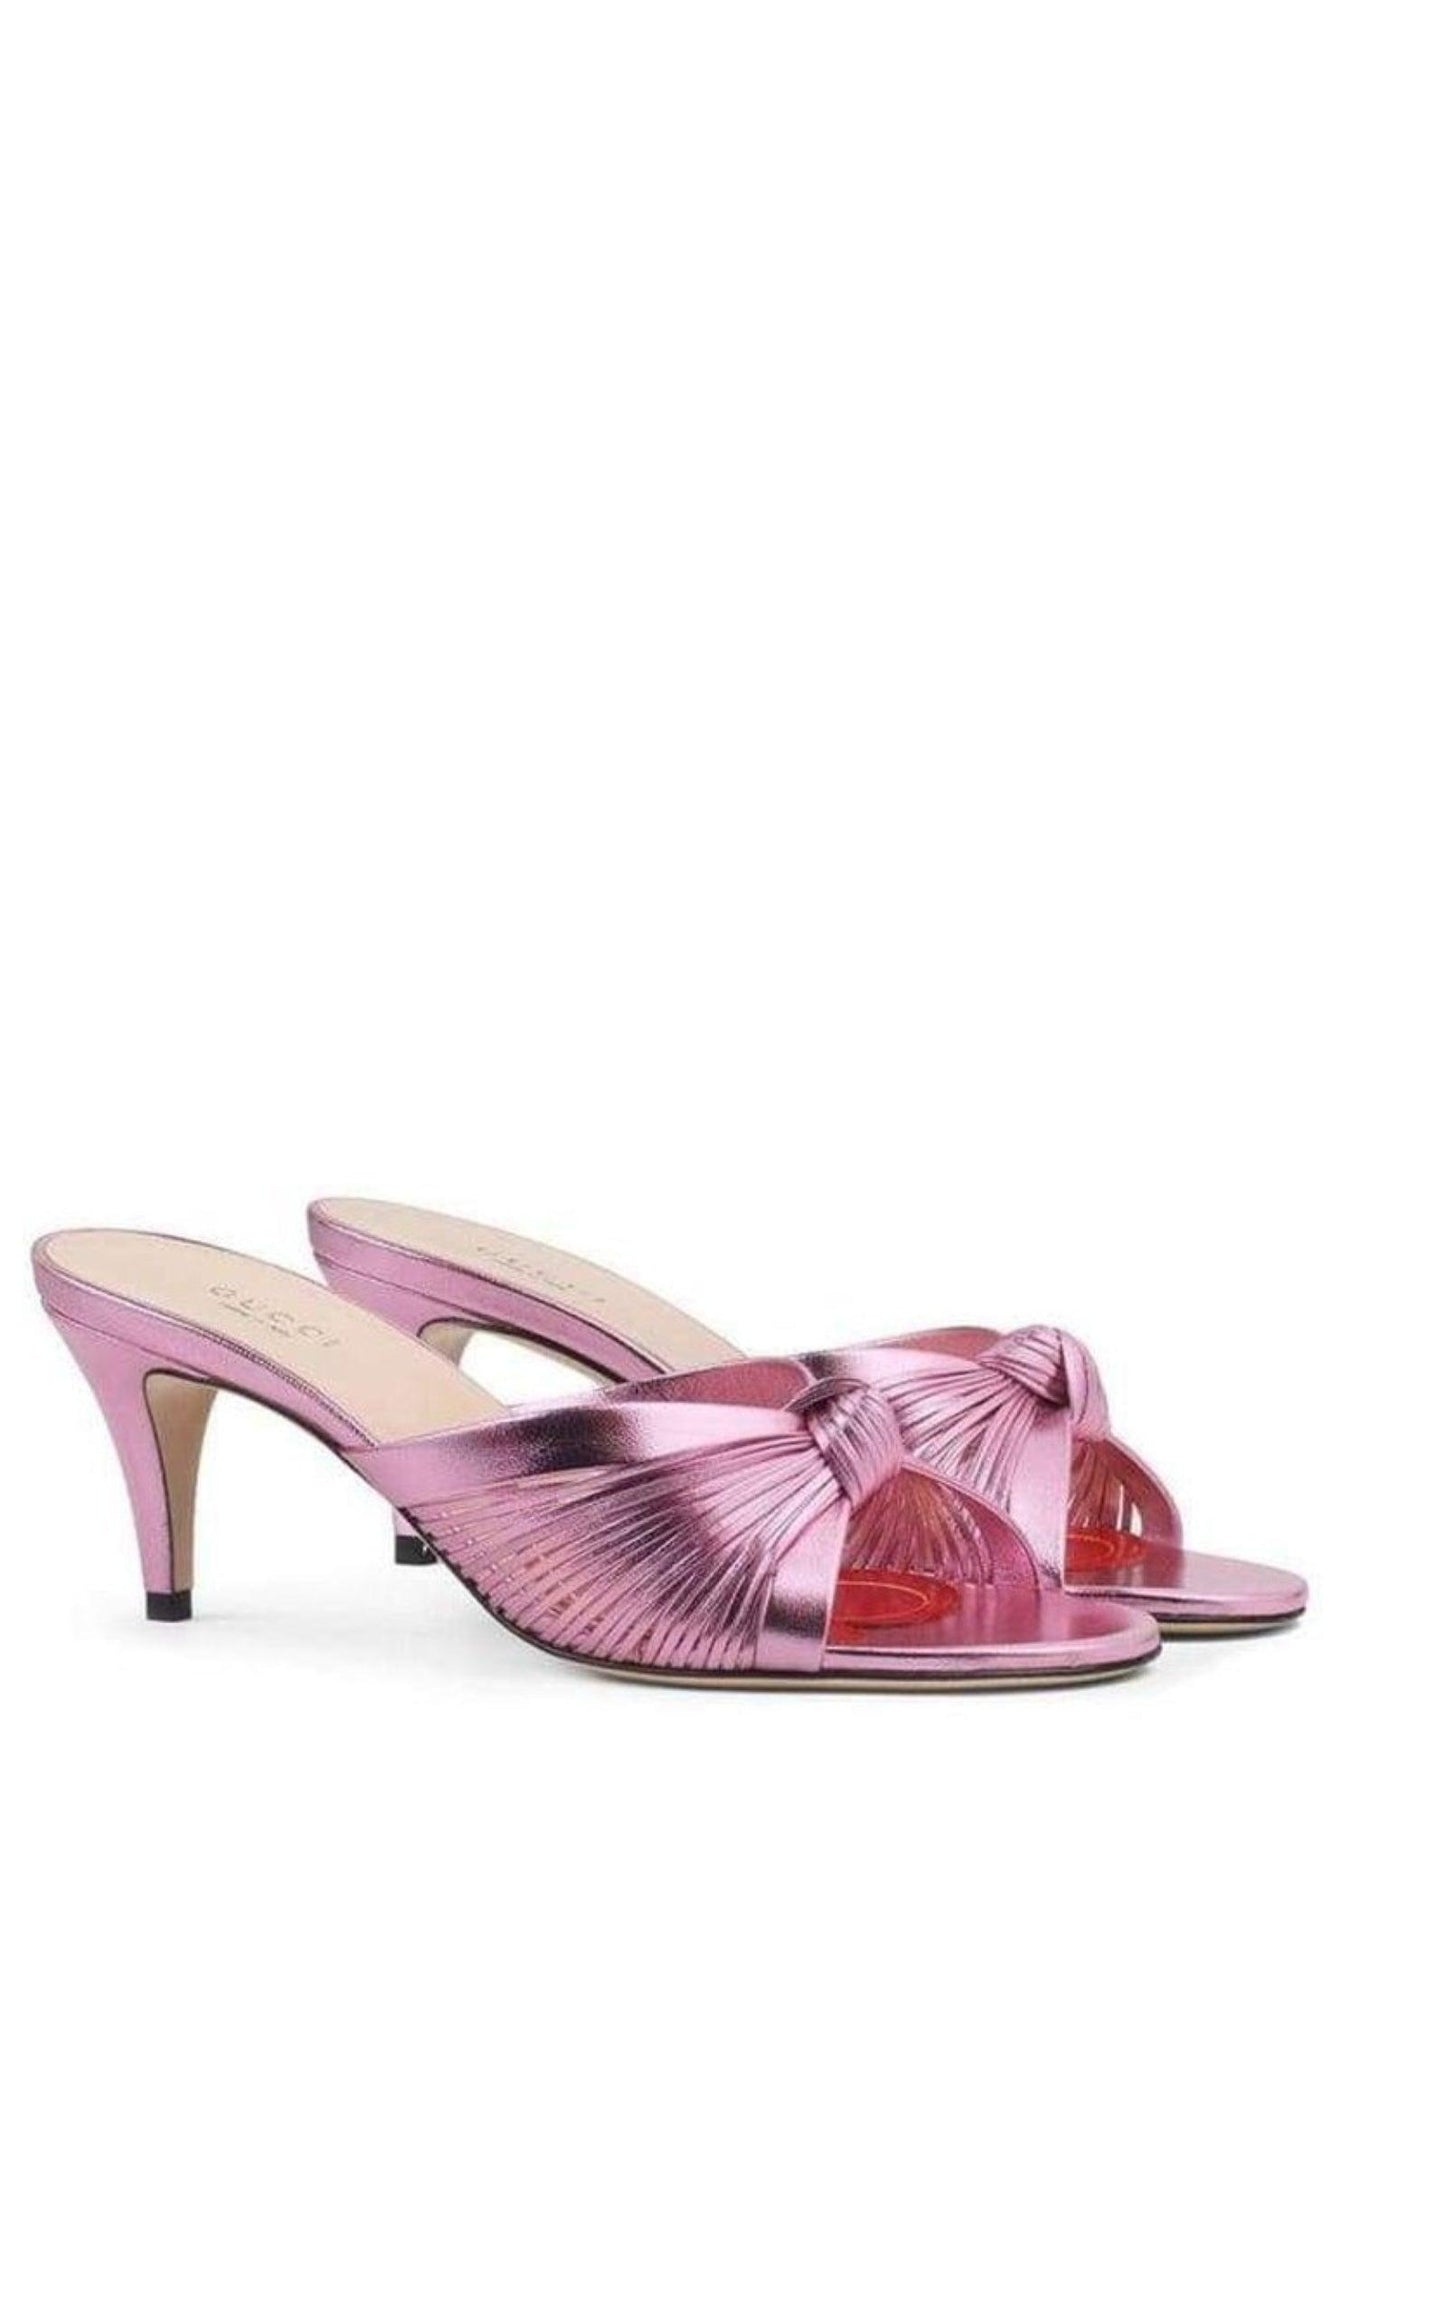  GucciKnotted Metallic Leather Mid-Heel Bow Mule - Runway Catalog